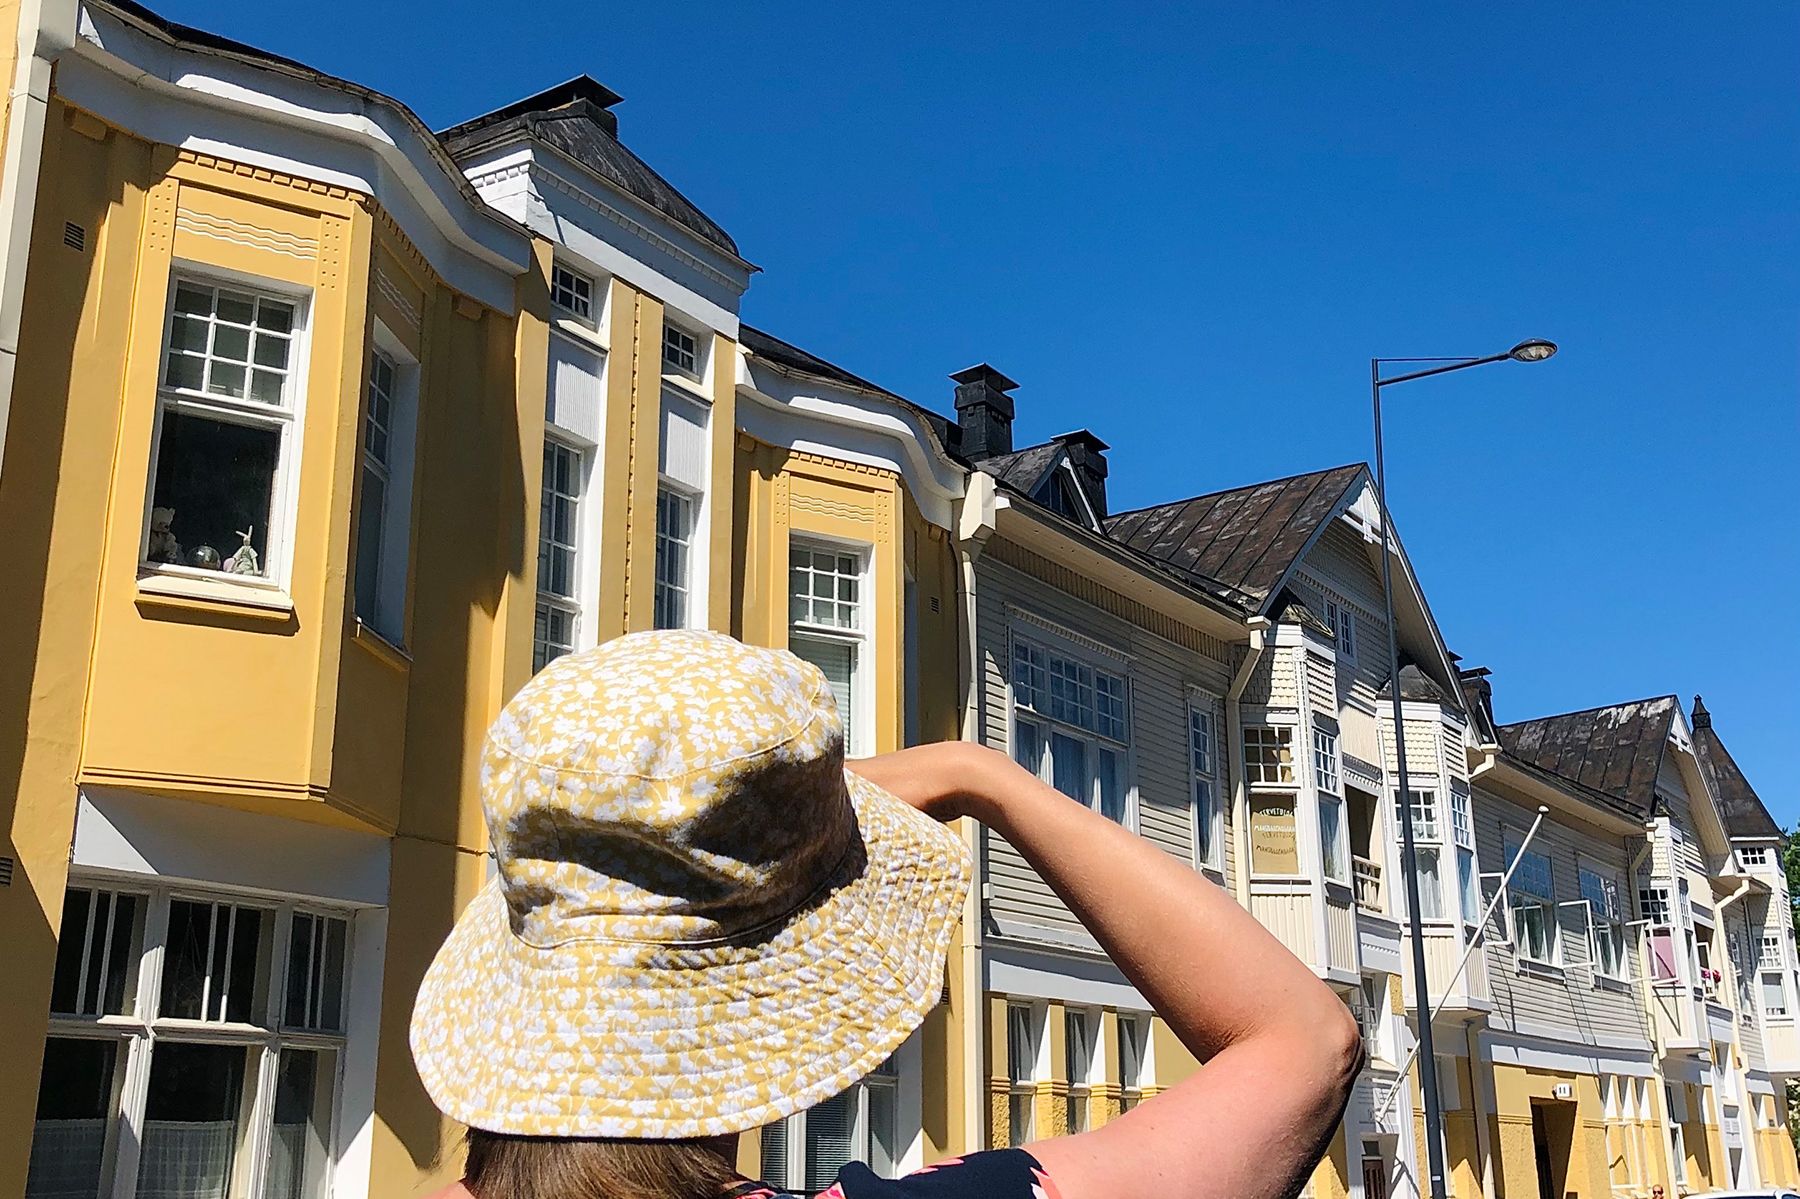 A person in a yellow hat looks at the yellow wooden houses on Piispankatu Street on a bright summer’s day.